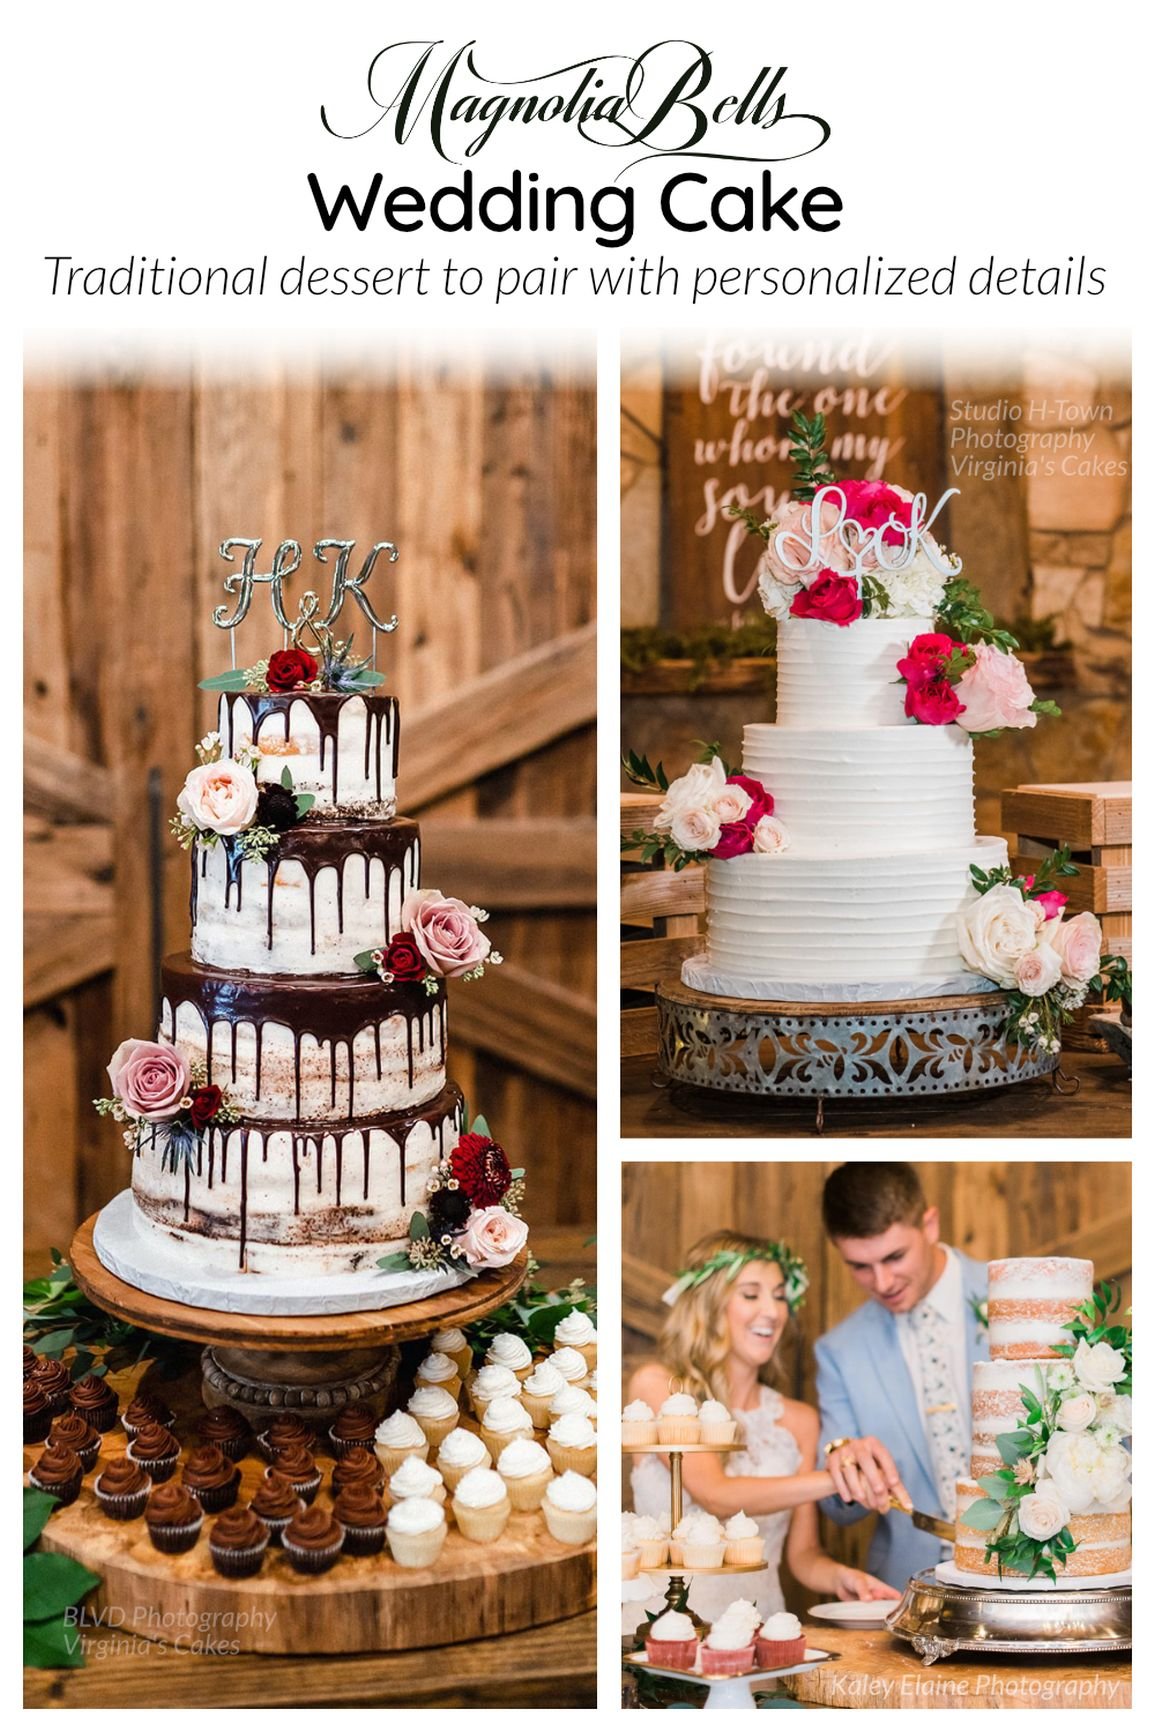 Delicious Desserts and Treat Inspiration for Your Wedding